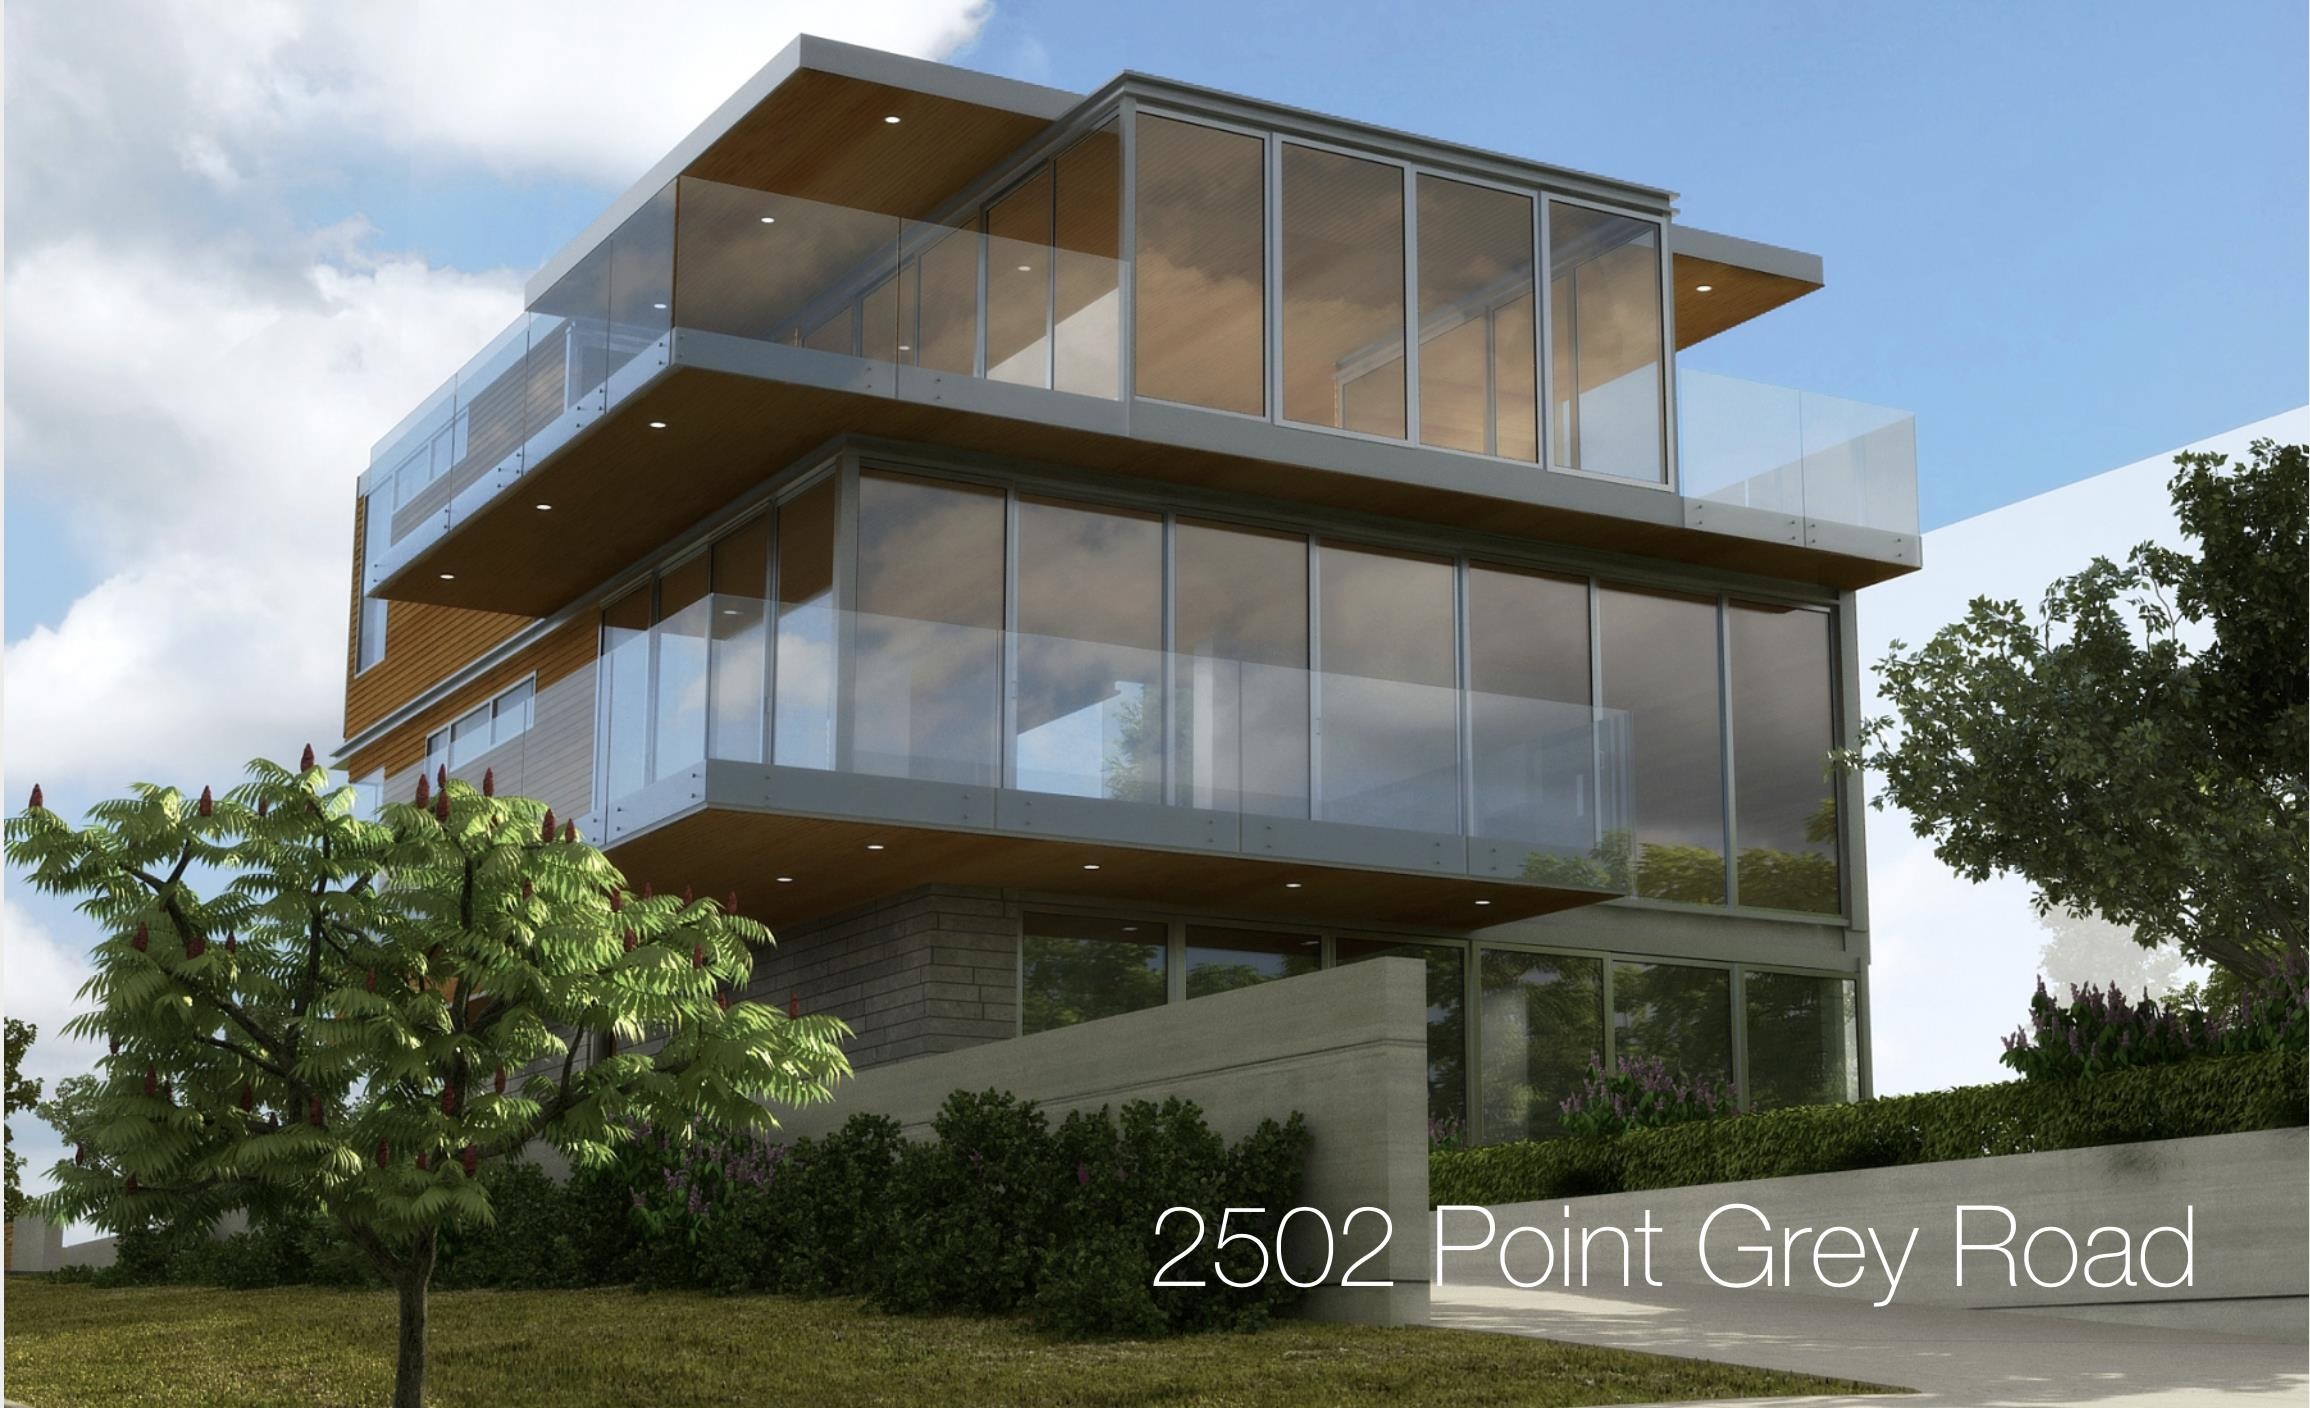 2502 POINT GREY ROAD Vancouver, British Columbia V6K 1A3